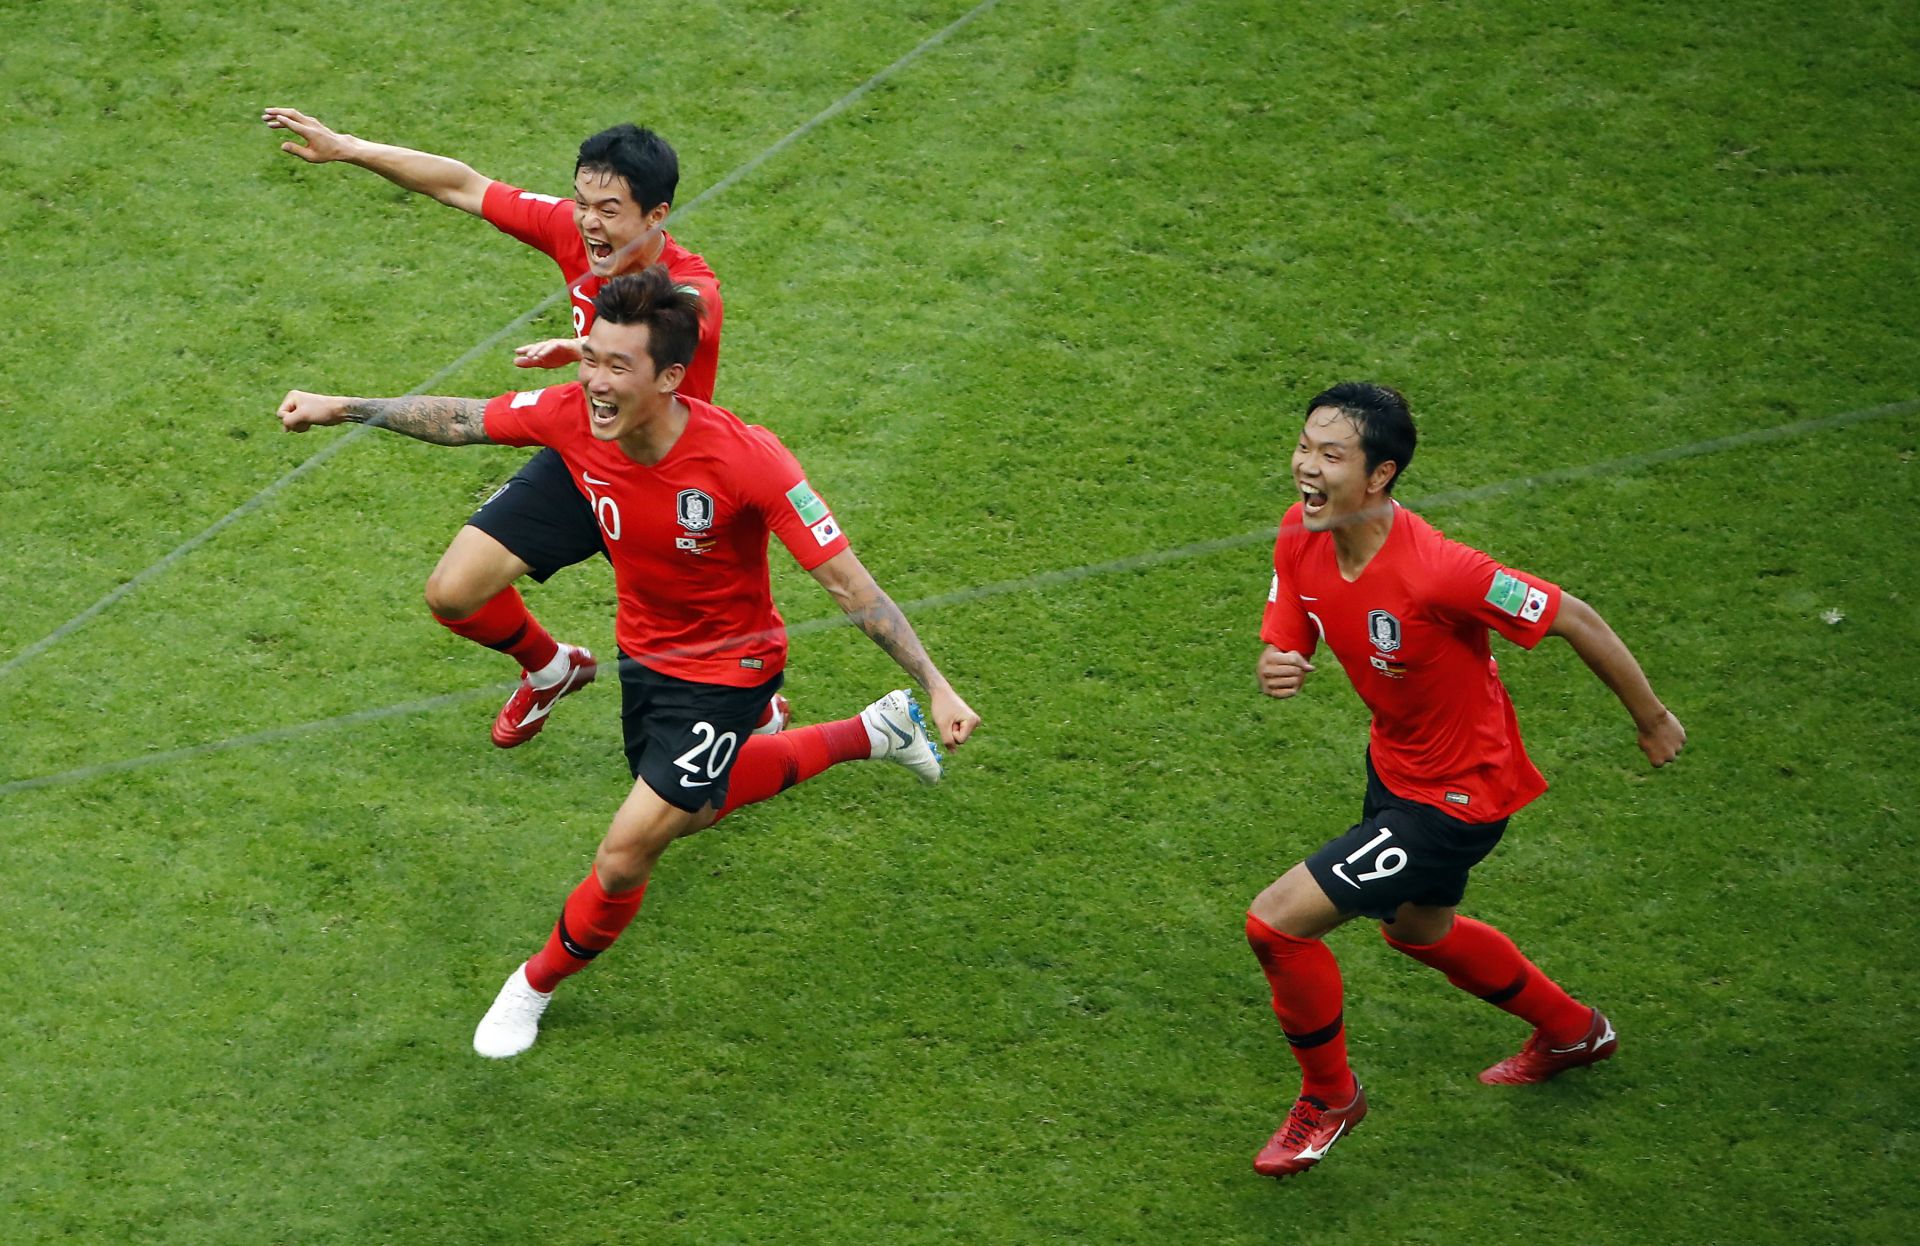 Players of South Korea react after scoring the 1-0 during the FIFA World Cup 2018 group F preliminary round soccer match between South Korea and Germany in Kazan, Russia, 27 June 2018.